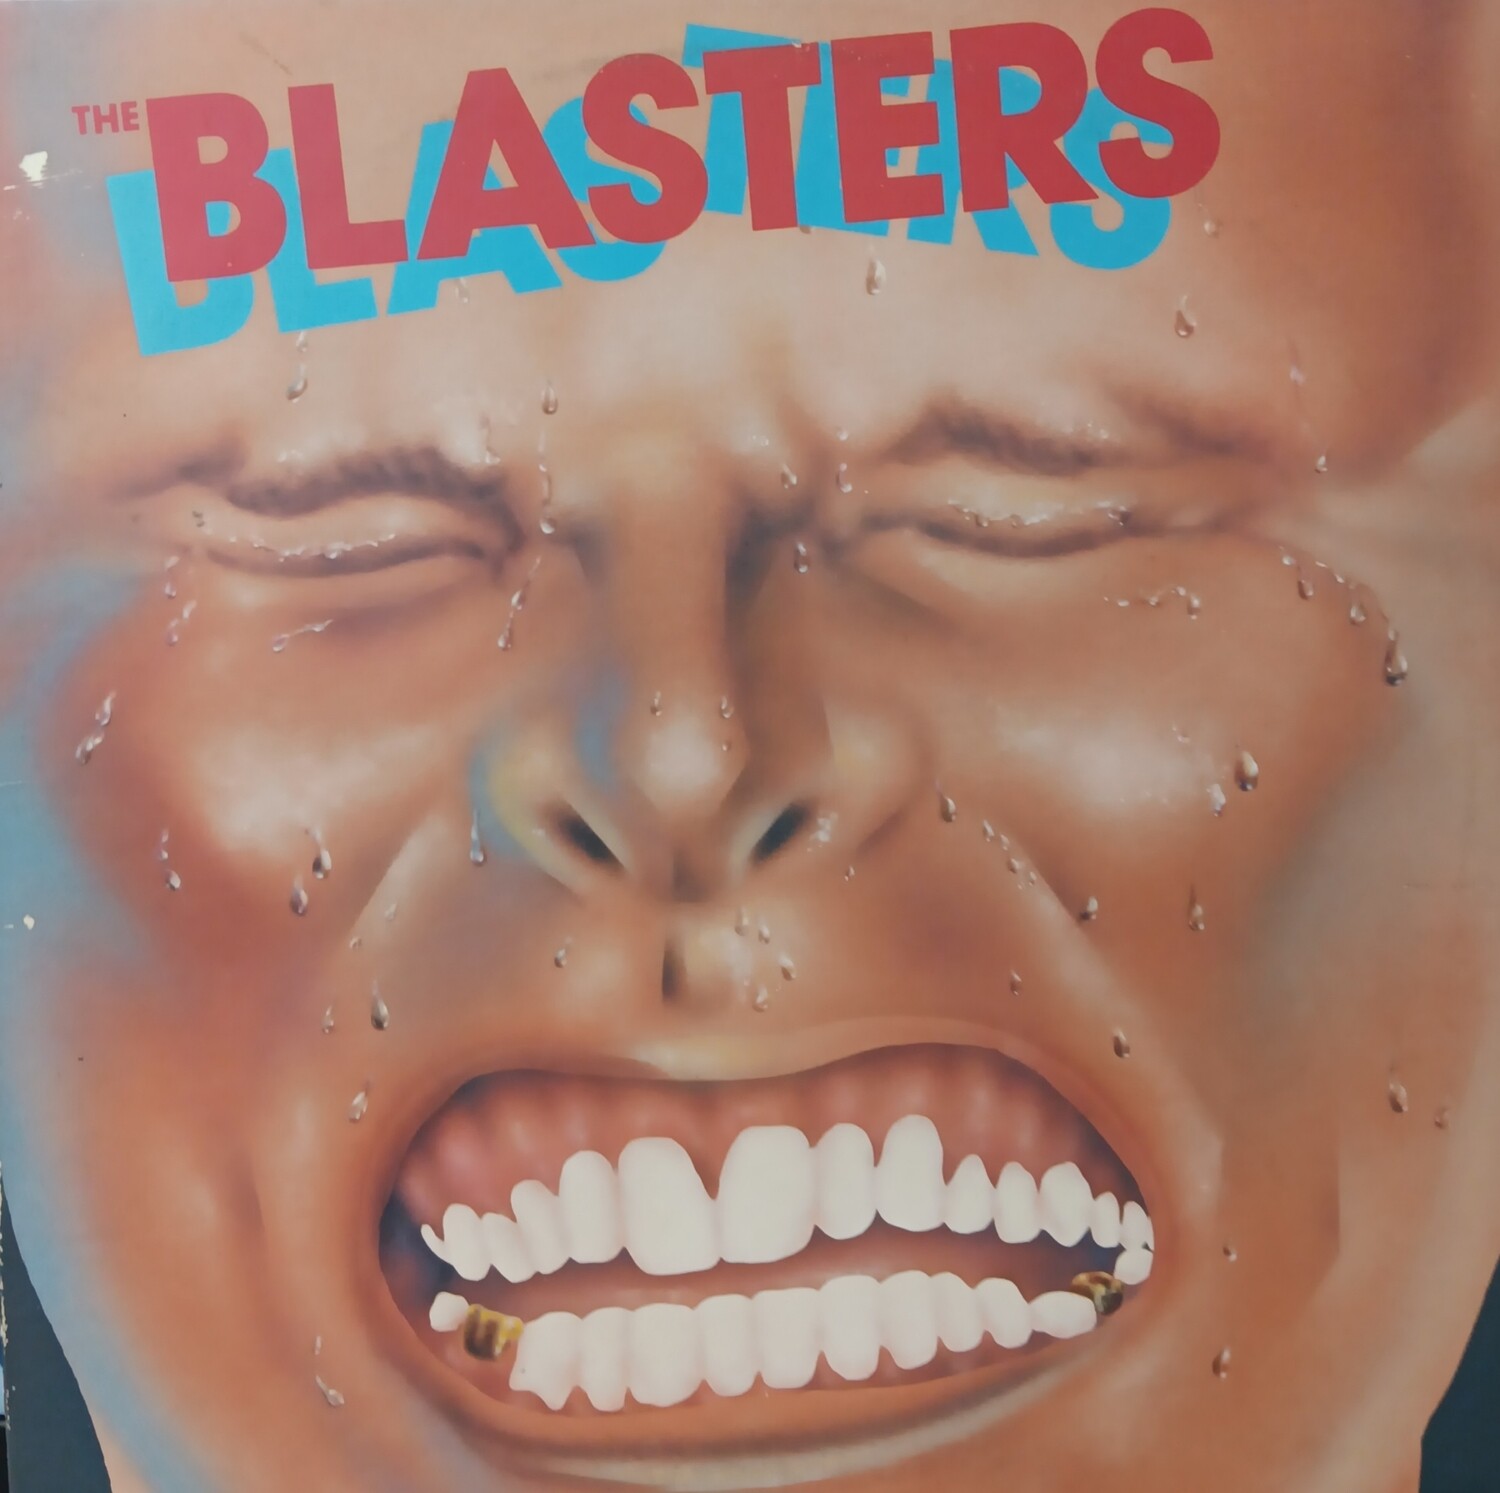 THE BLASTERS - The Blasters